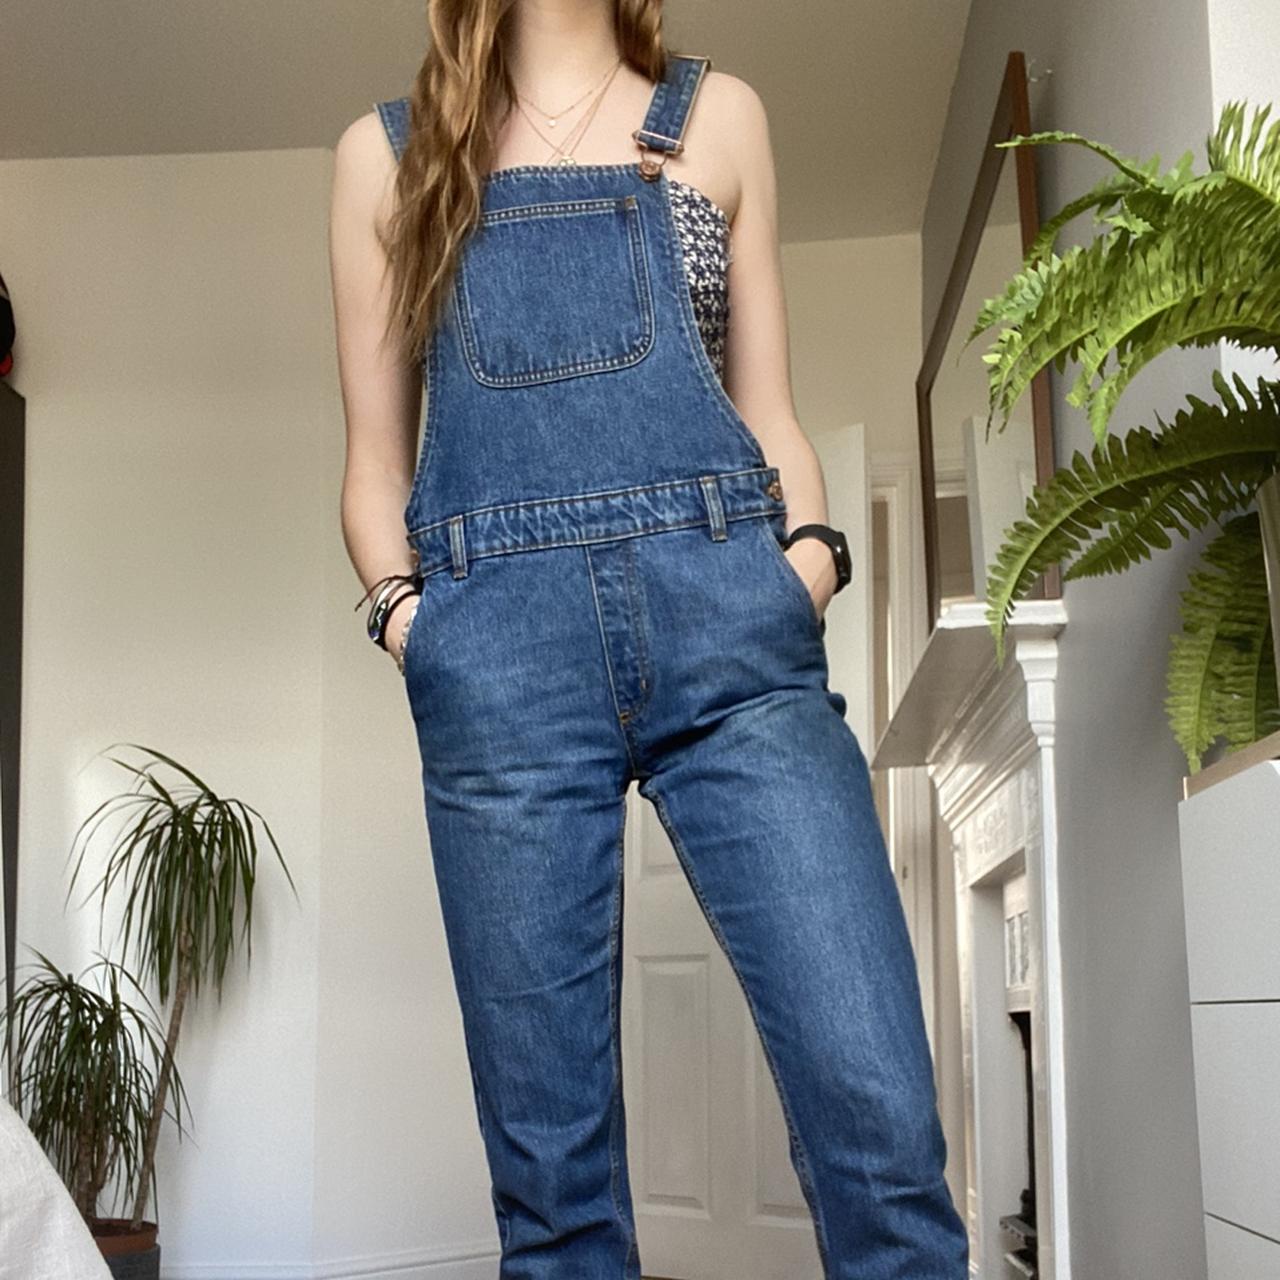 Free shipping! Perfect pair of denim dungarees from... - Depop